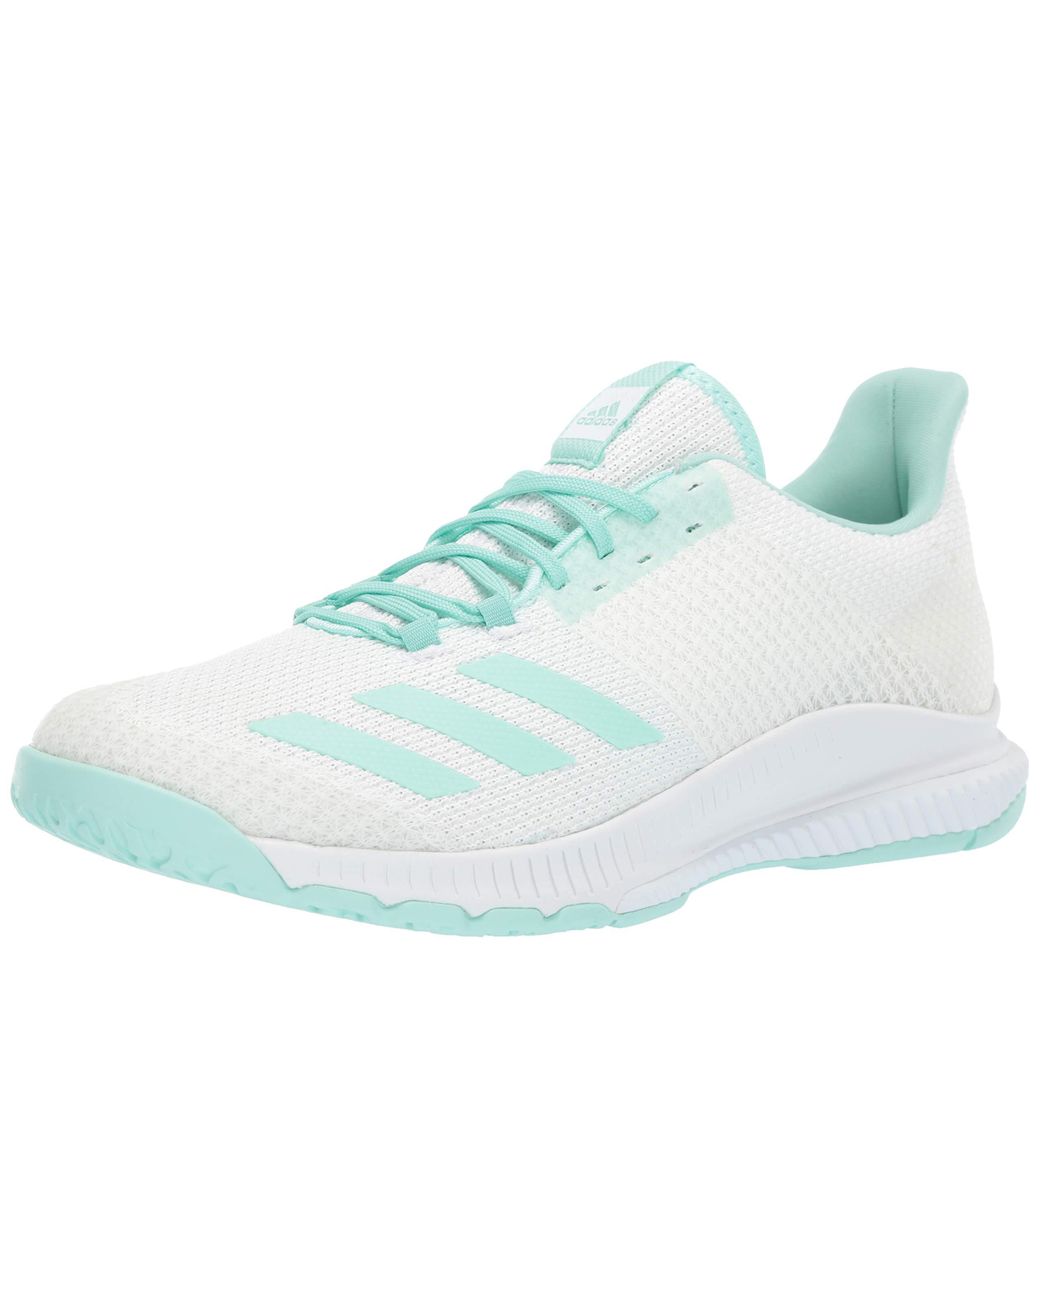 adidas Crazyflight Bounce 2 Shoes in Green | Lyst